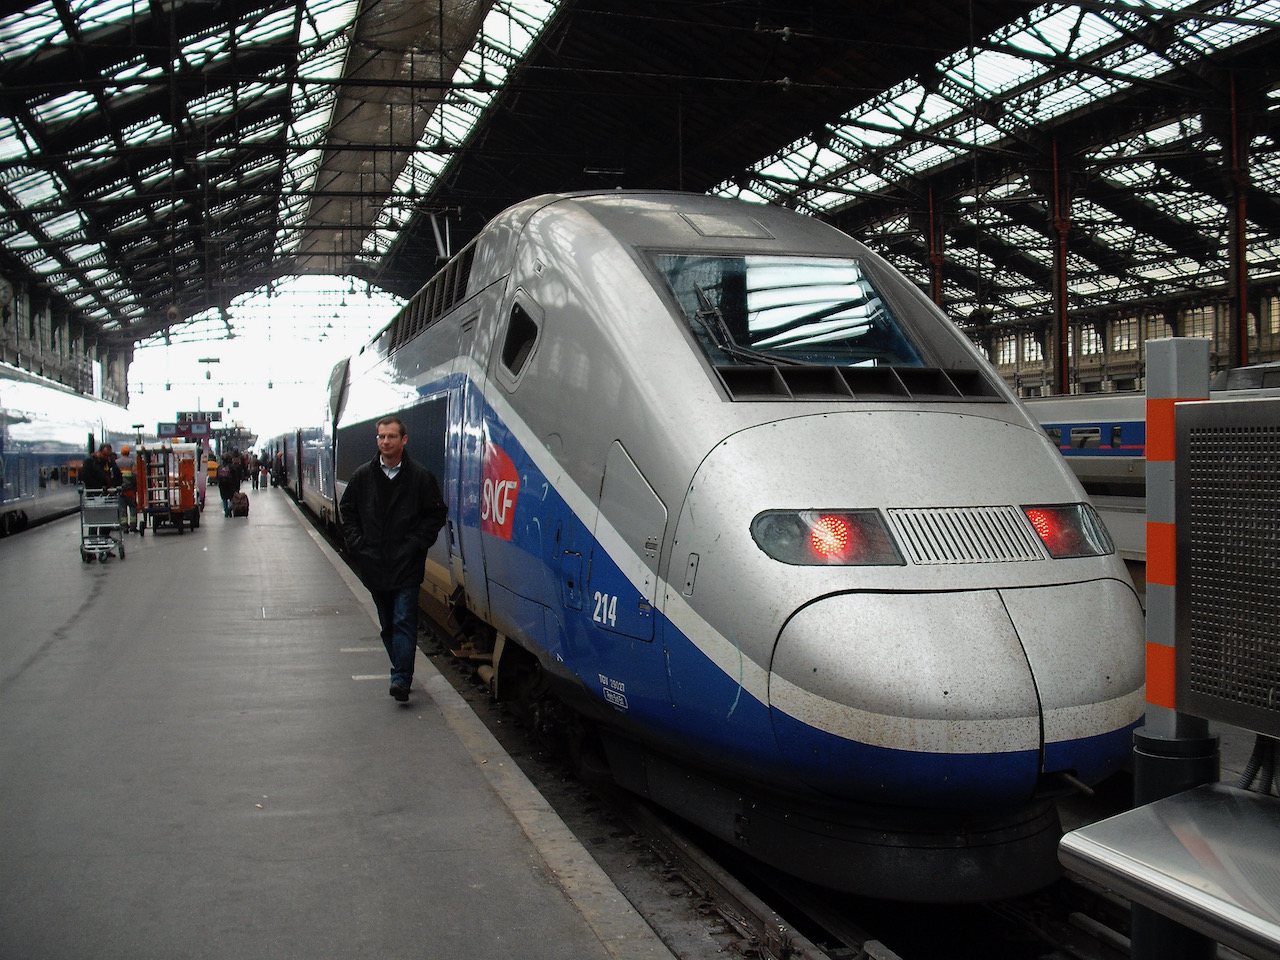 TGV 6917 about to depart